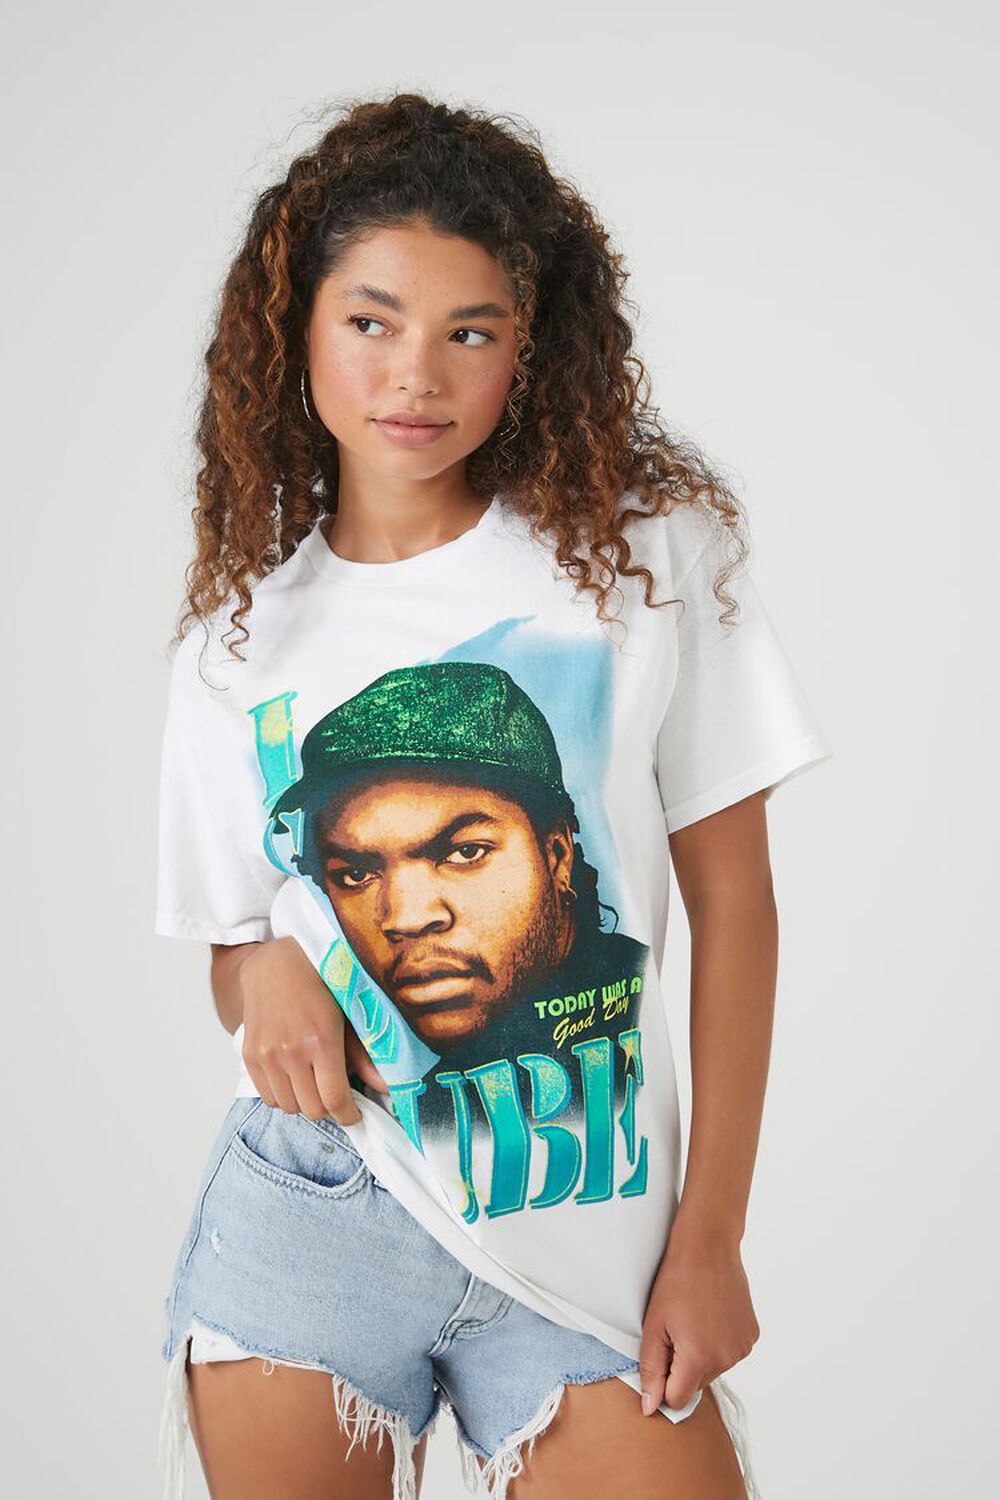 ICE CUBE Today Was A Good Day T shirt Ice Cube Rapper Shirt Tee